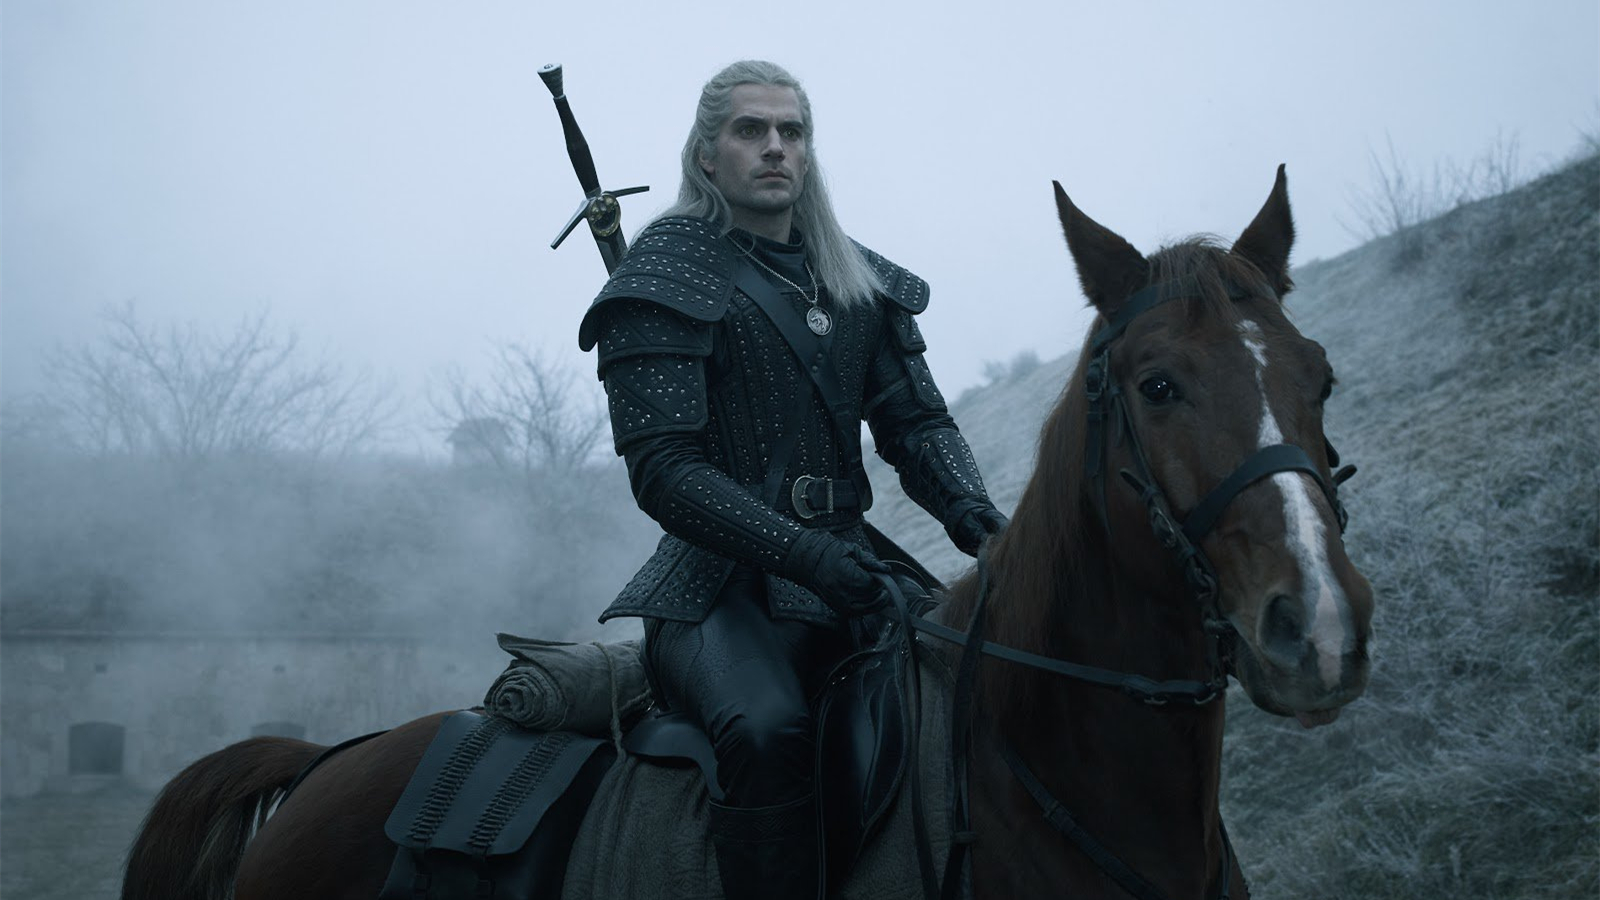 Henry Cavill won’t return to The Witcher despite losing Superman role | FMV6